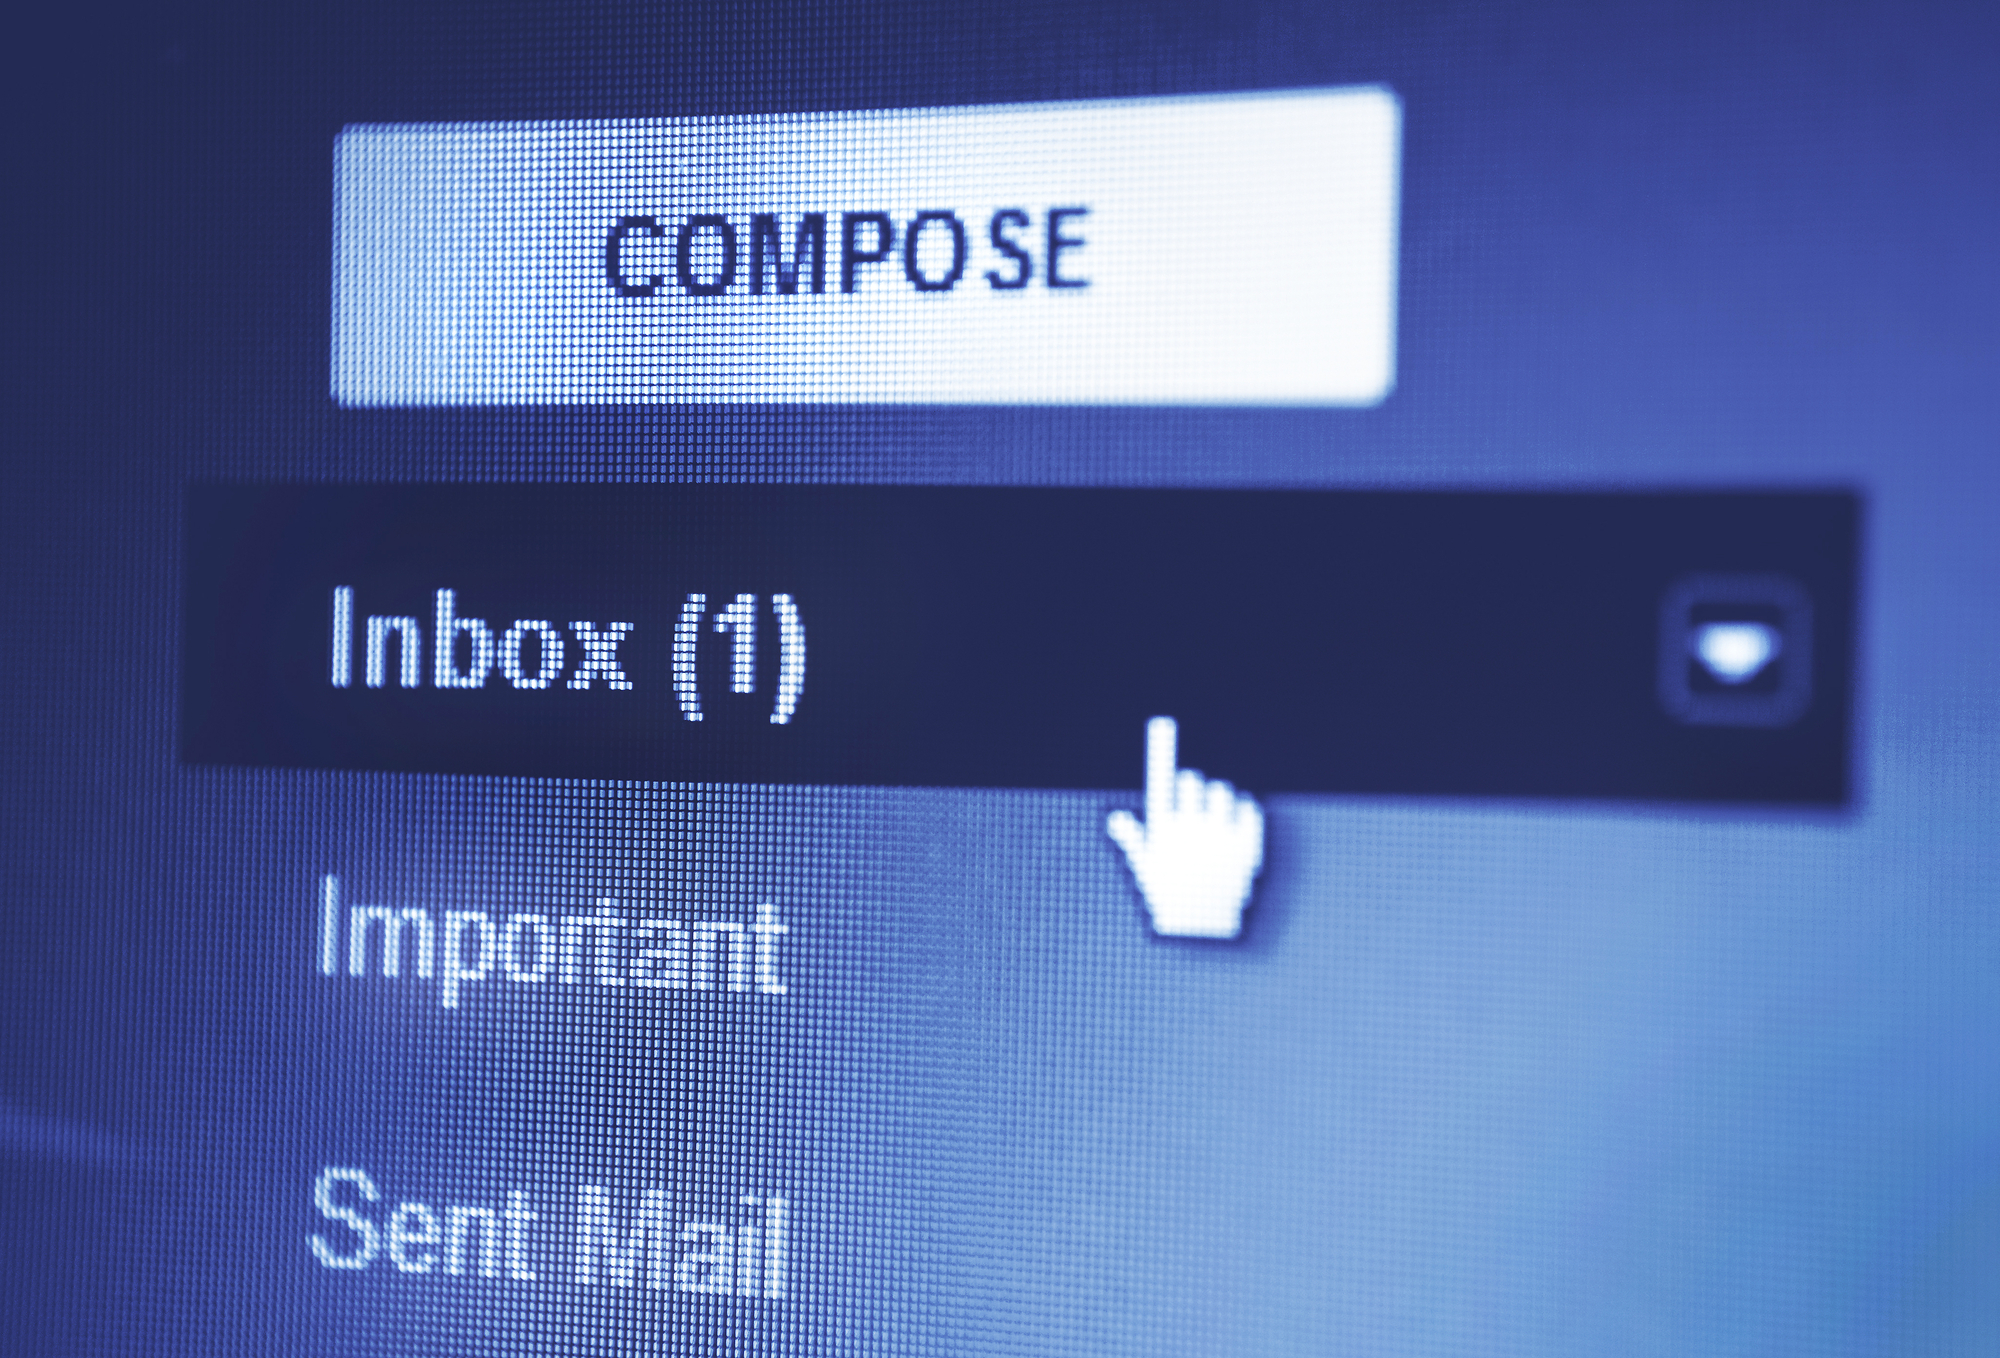 Email-Based Cyber Attacks Increase 222% as Phishing Dominates as Top Vector